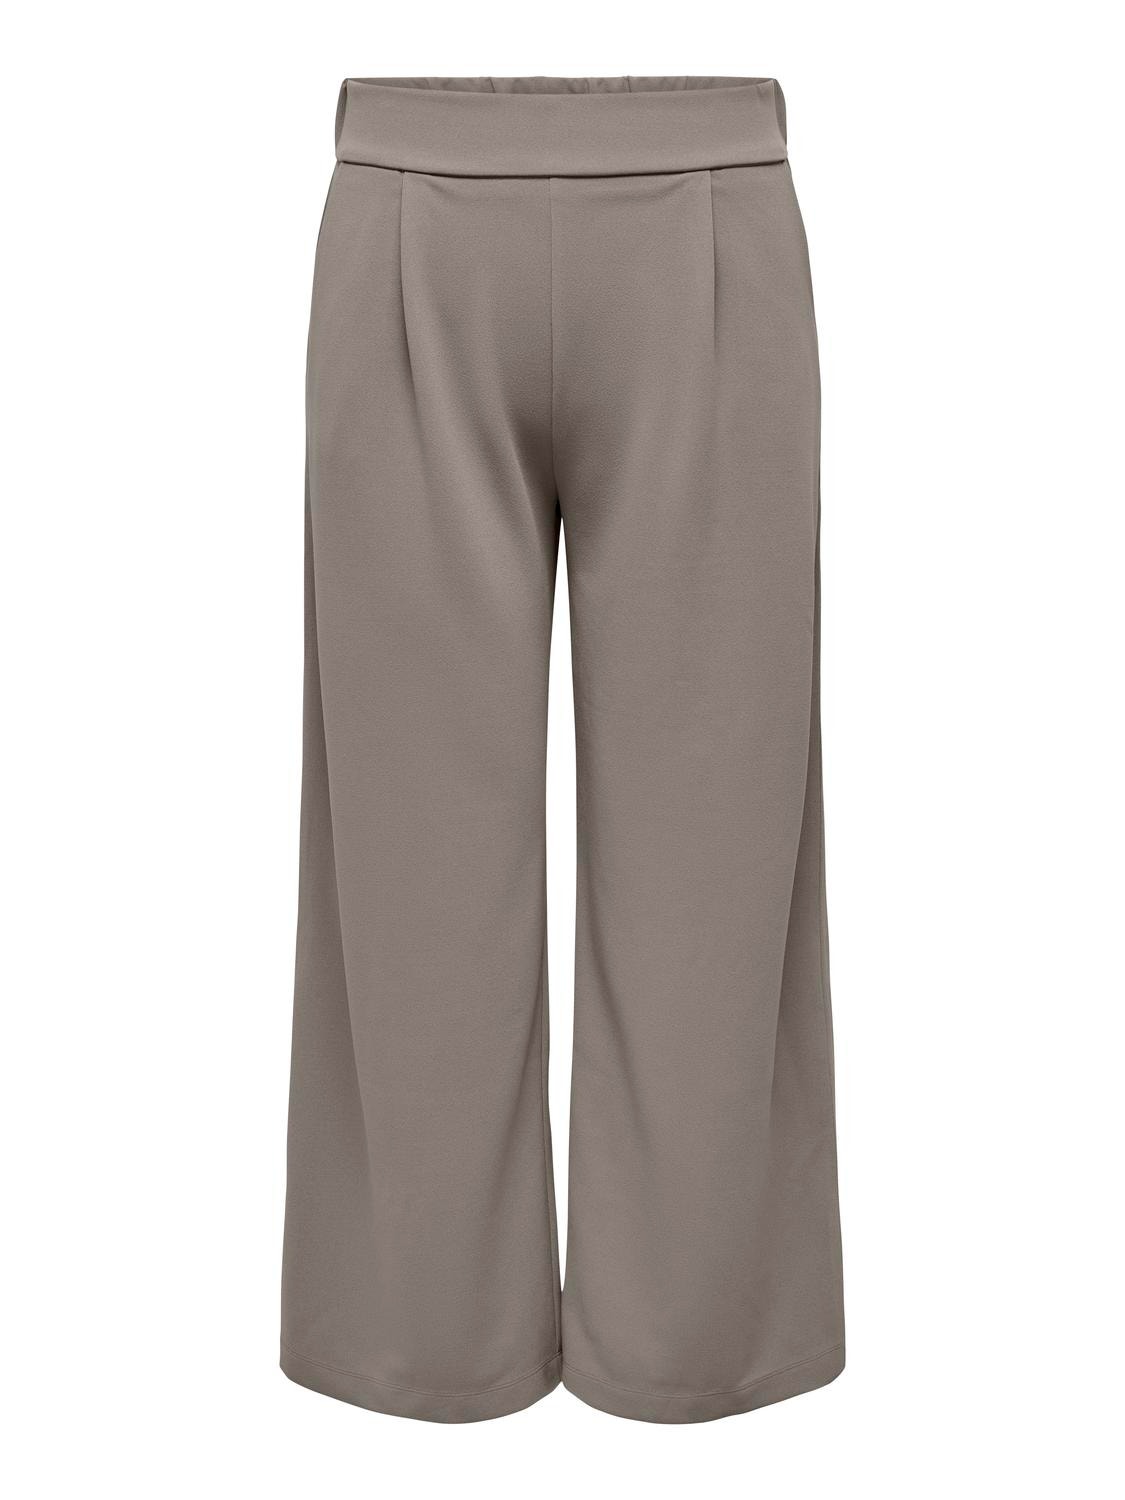 ONLY Regular Fit Trousers -Driftwood - 15309915